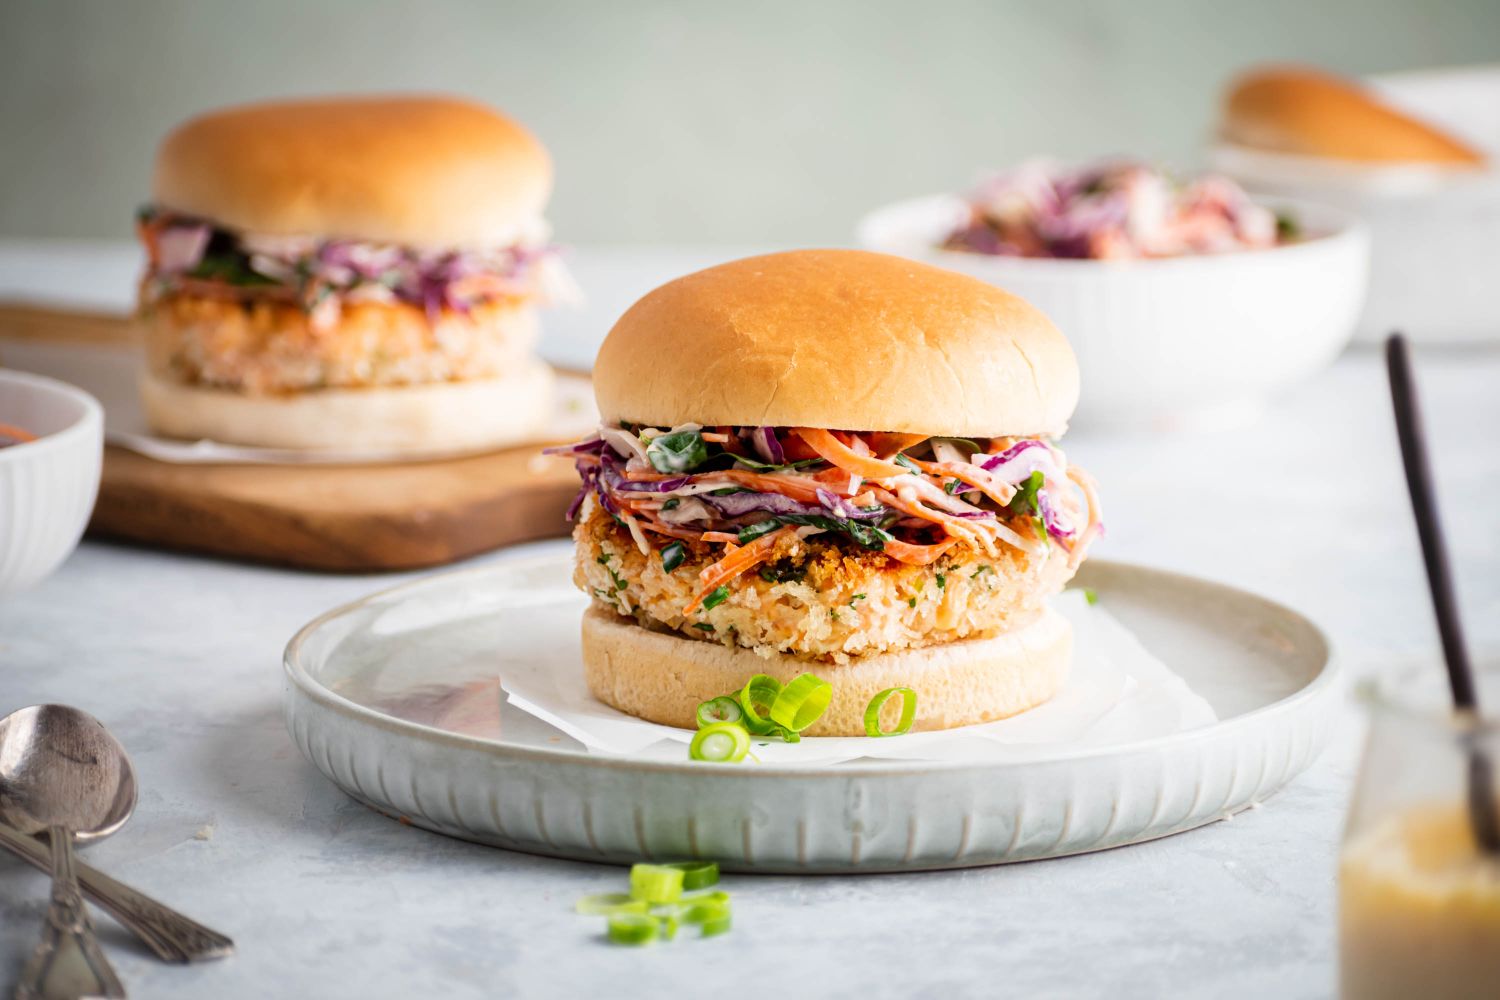 Salmon burgers with fresh salmon and spices served on a bun with coleslaw.